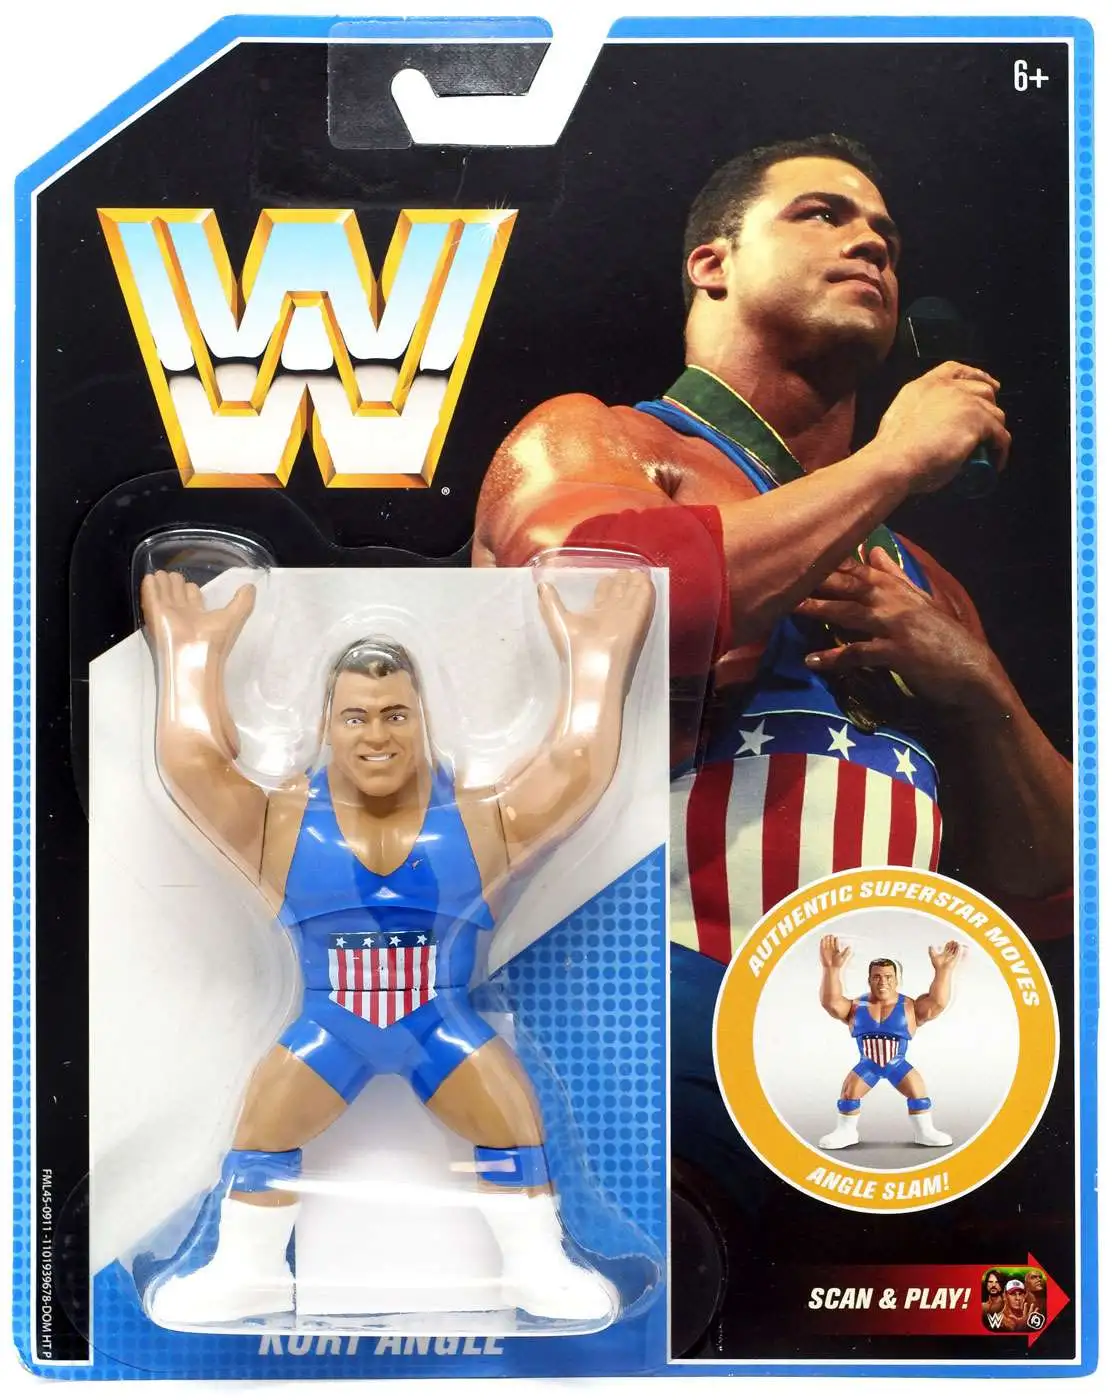 WWE Kurt Angle Retro Wrestling Action Figures 4.5 inches Tall 